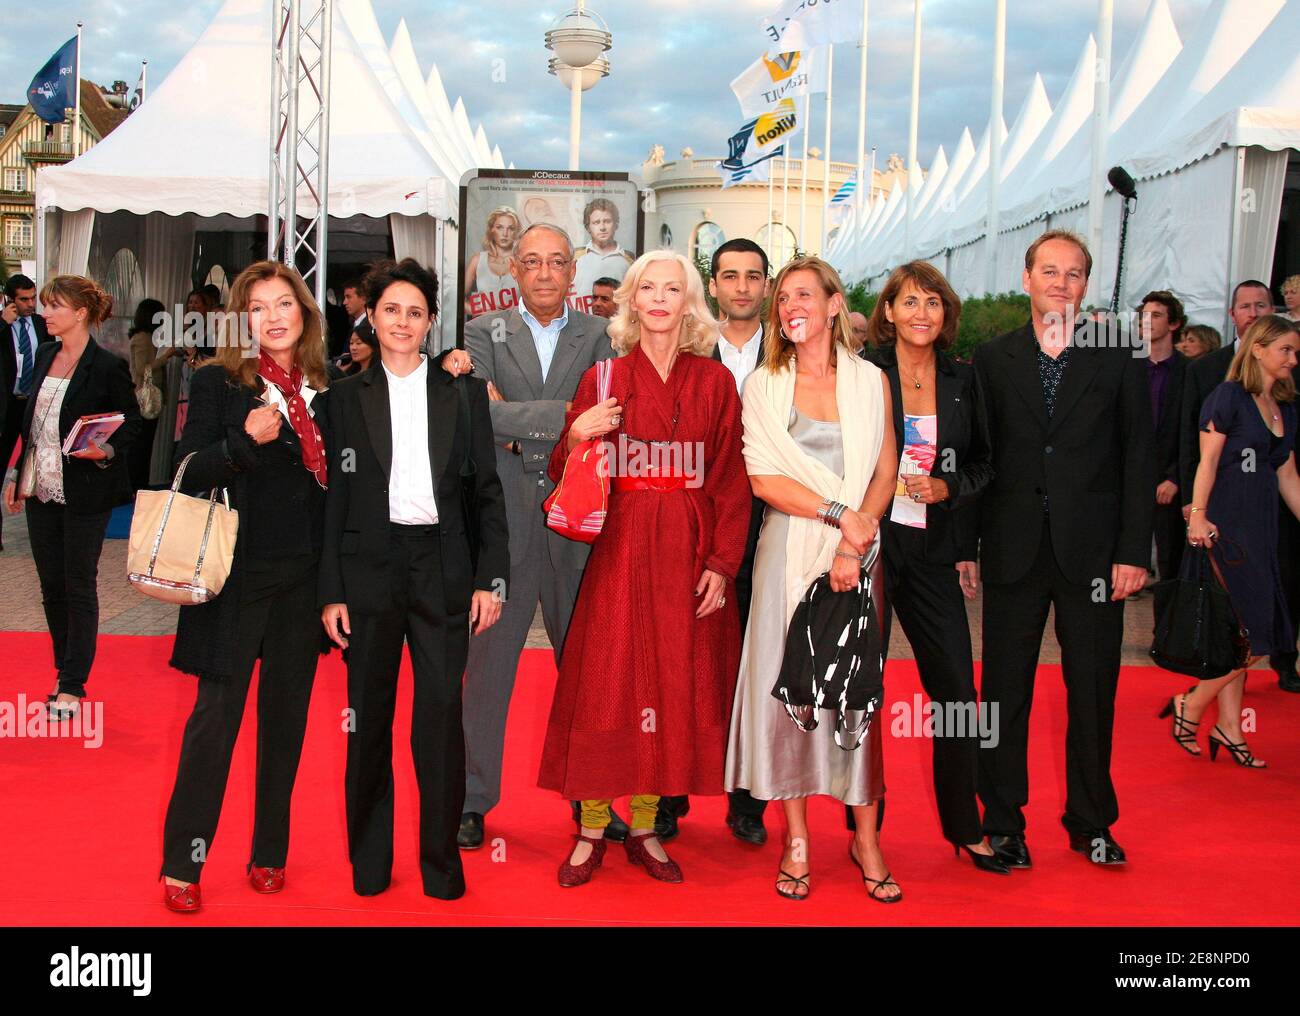 Jury's members Marie-France Pisier, Anouk Grinberg, Andre Techine, Culture minister Christine Albanel and Xavier Beauvois attends the screening of 'Michael Clayton' as part of the 33rd American Film Festival in Deauville, France, on September 2, 2007. Photo by Denis Guignebourg/ABACAPRESS.COM Stock Photo